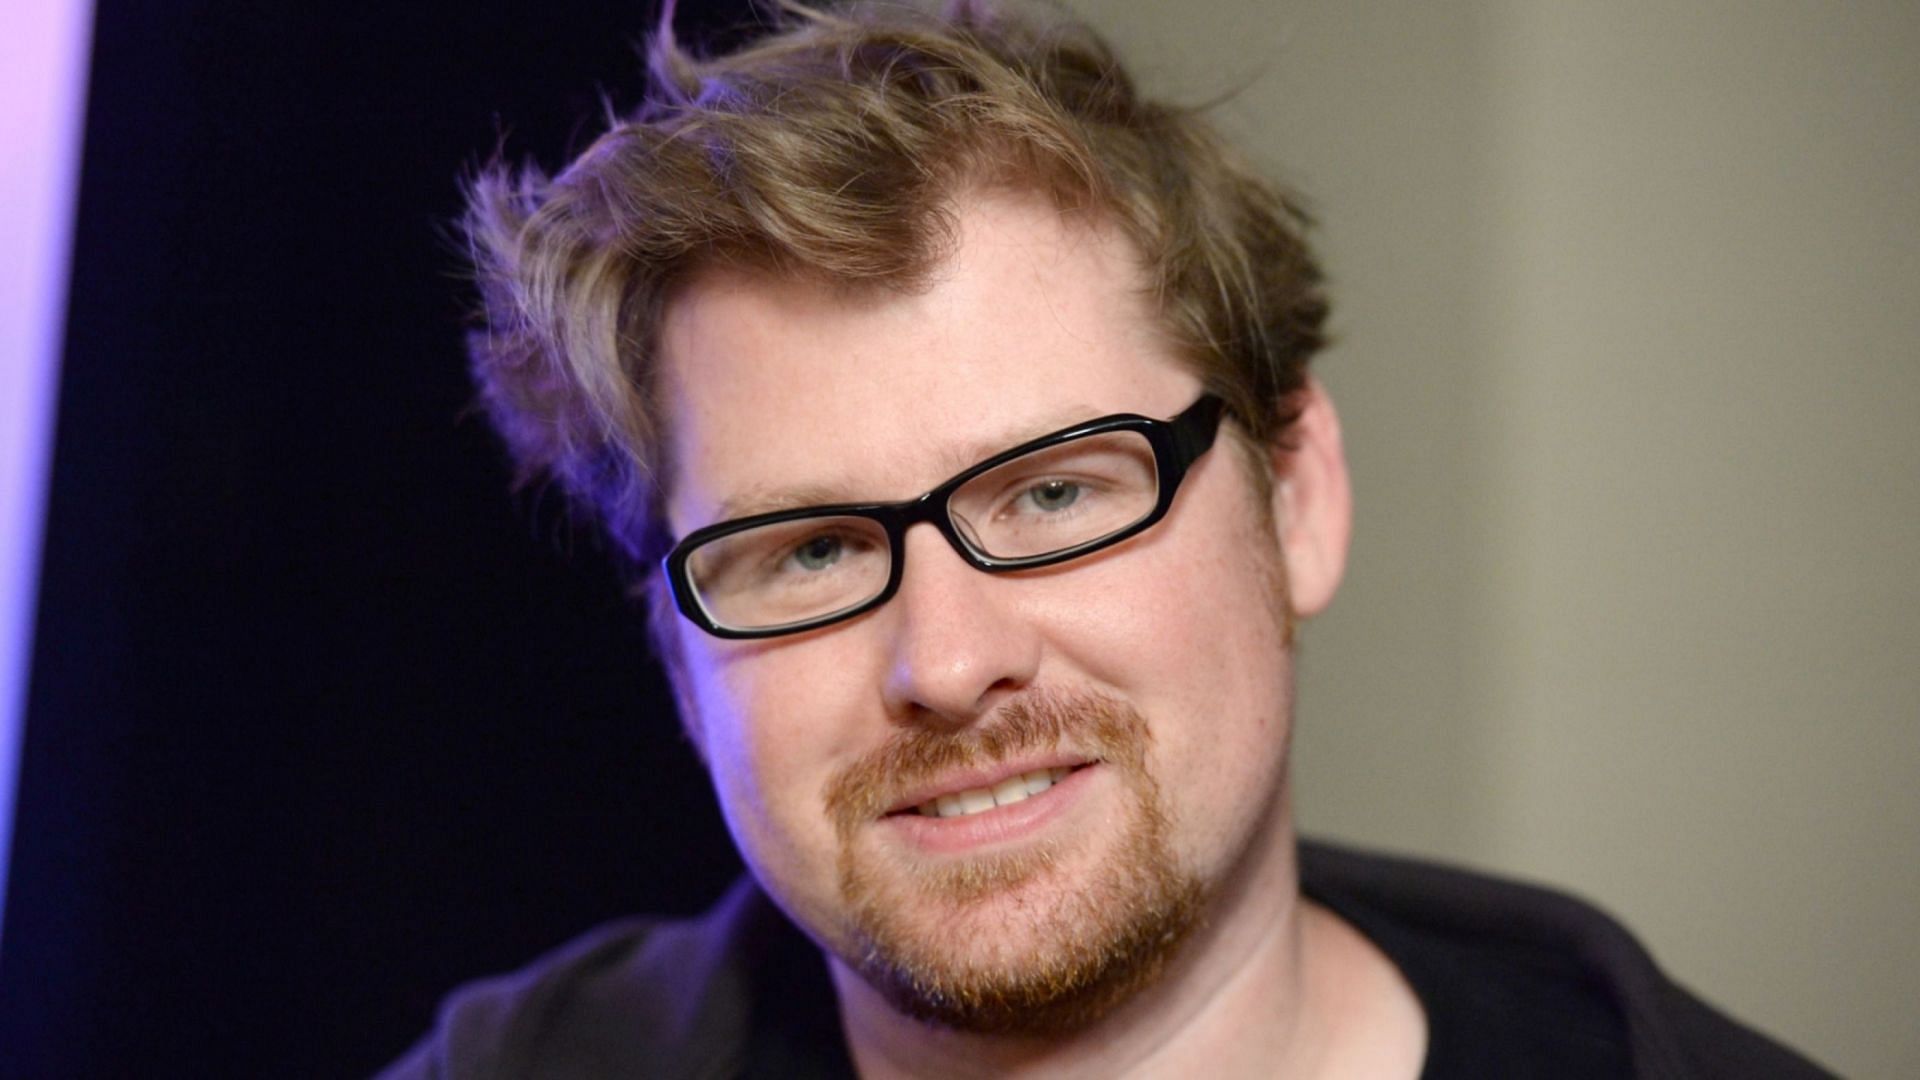 Clips of Justin Roiland admitting to being attracted to minors resurfaces online (Image via WireImages)